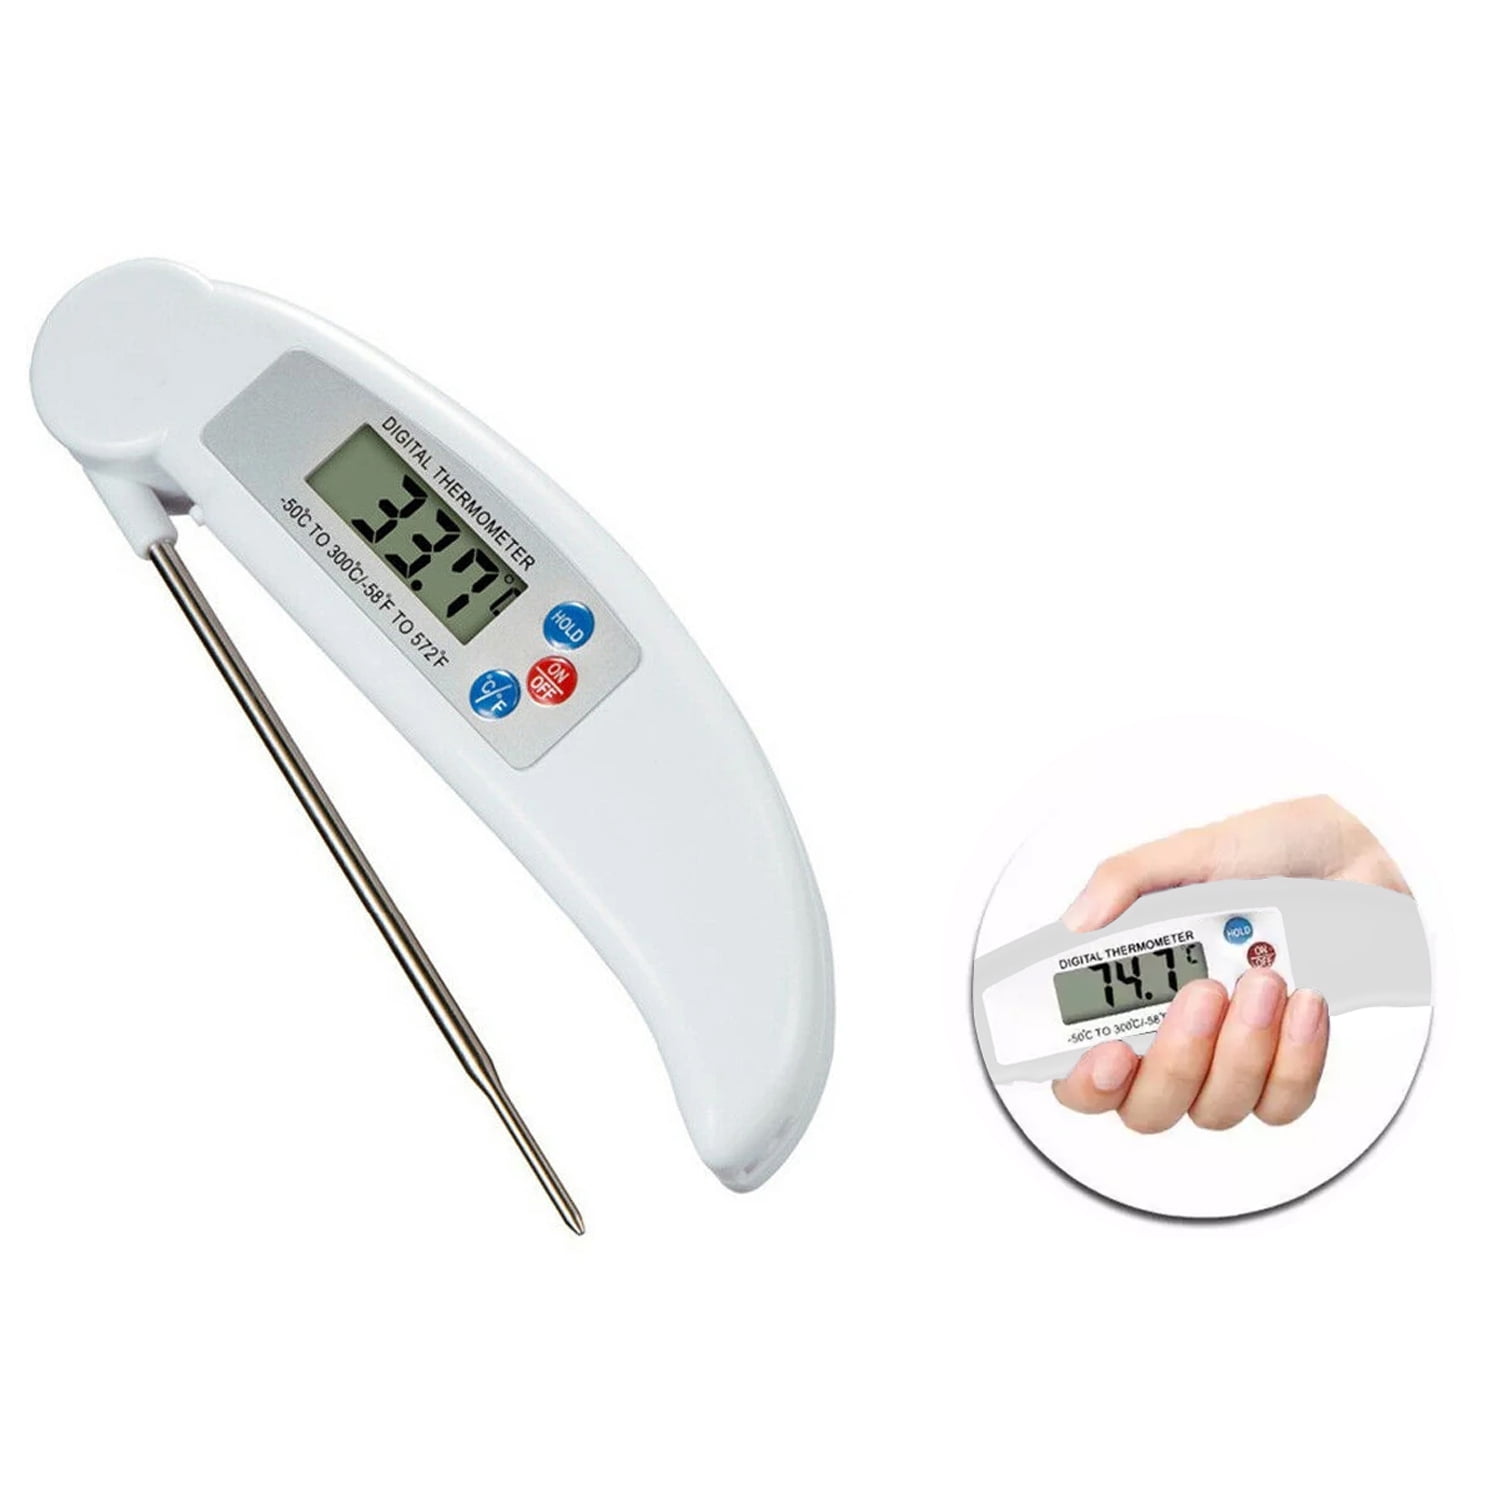 Kitchen Meat Thermometer ULG Digital Instant Read Food Thermometer